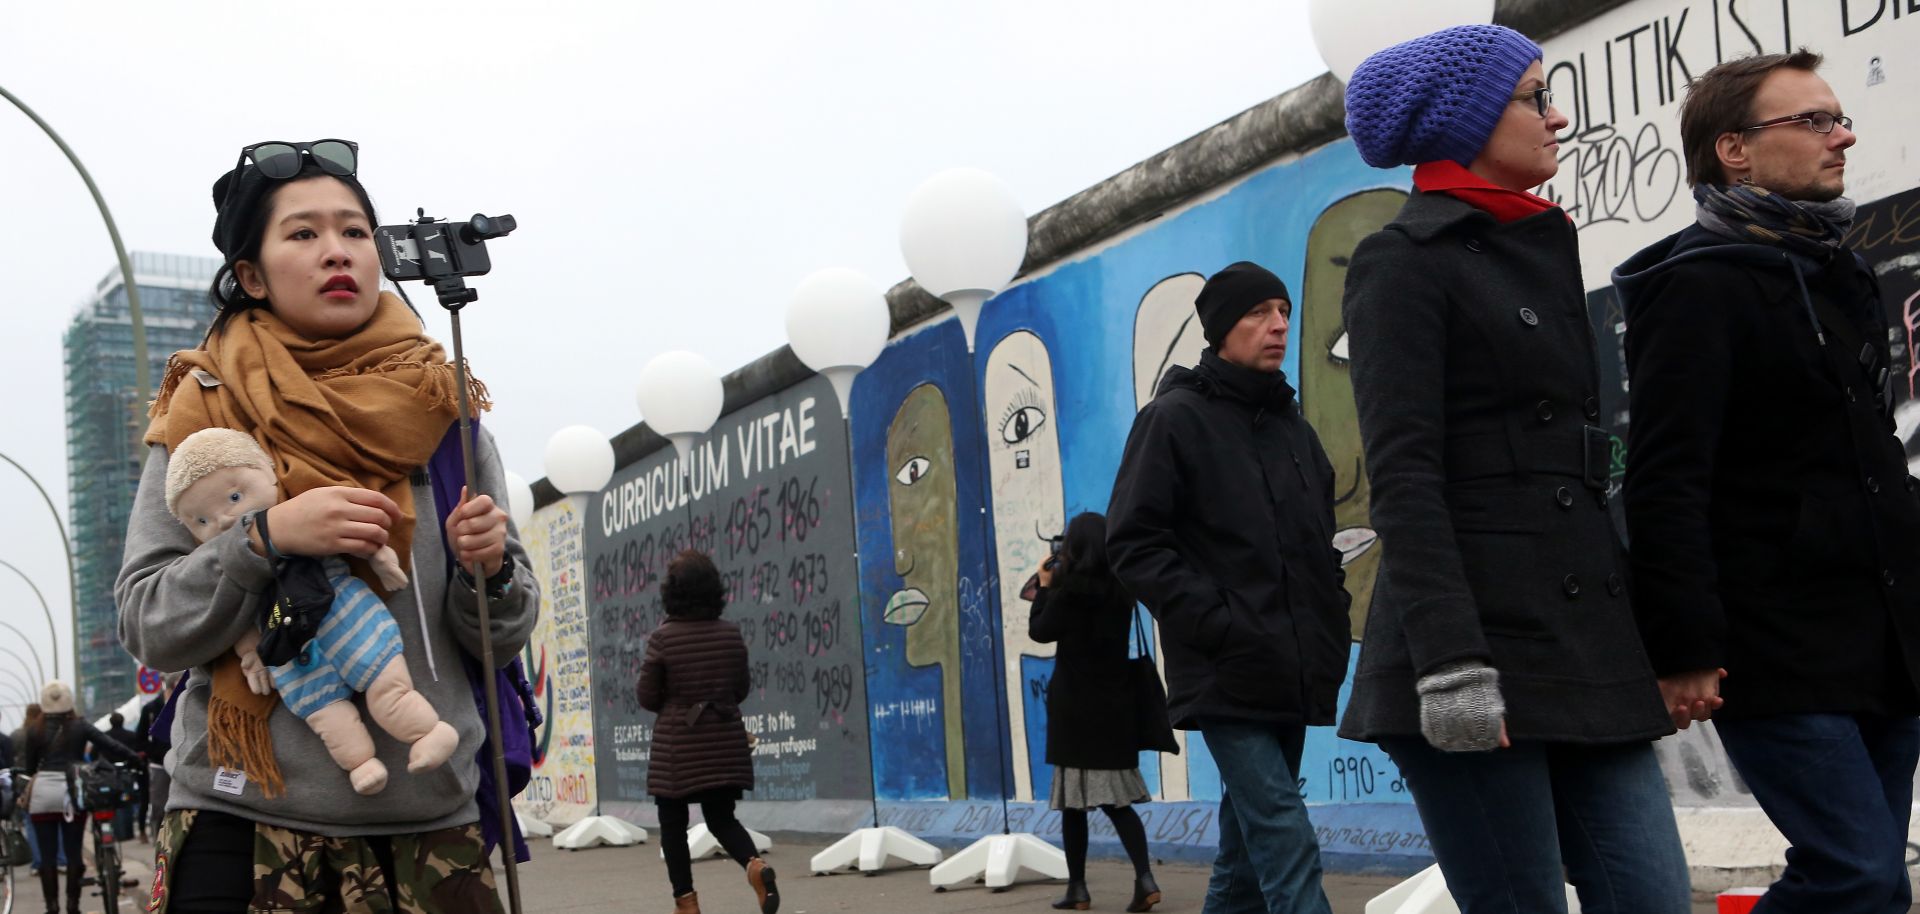 Visitors walk by East Side Gallery section of the former Berlin Wall during celebrations for the 25th anniversary of the fall of the wall that partitioned Germany during the Cold War, Nov. 9, 2014.